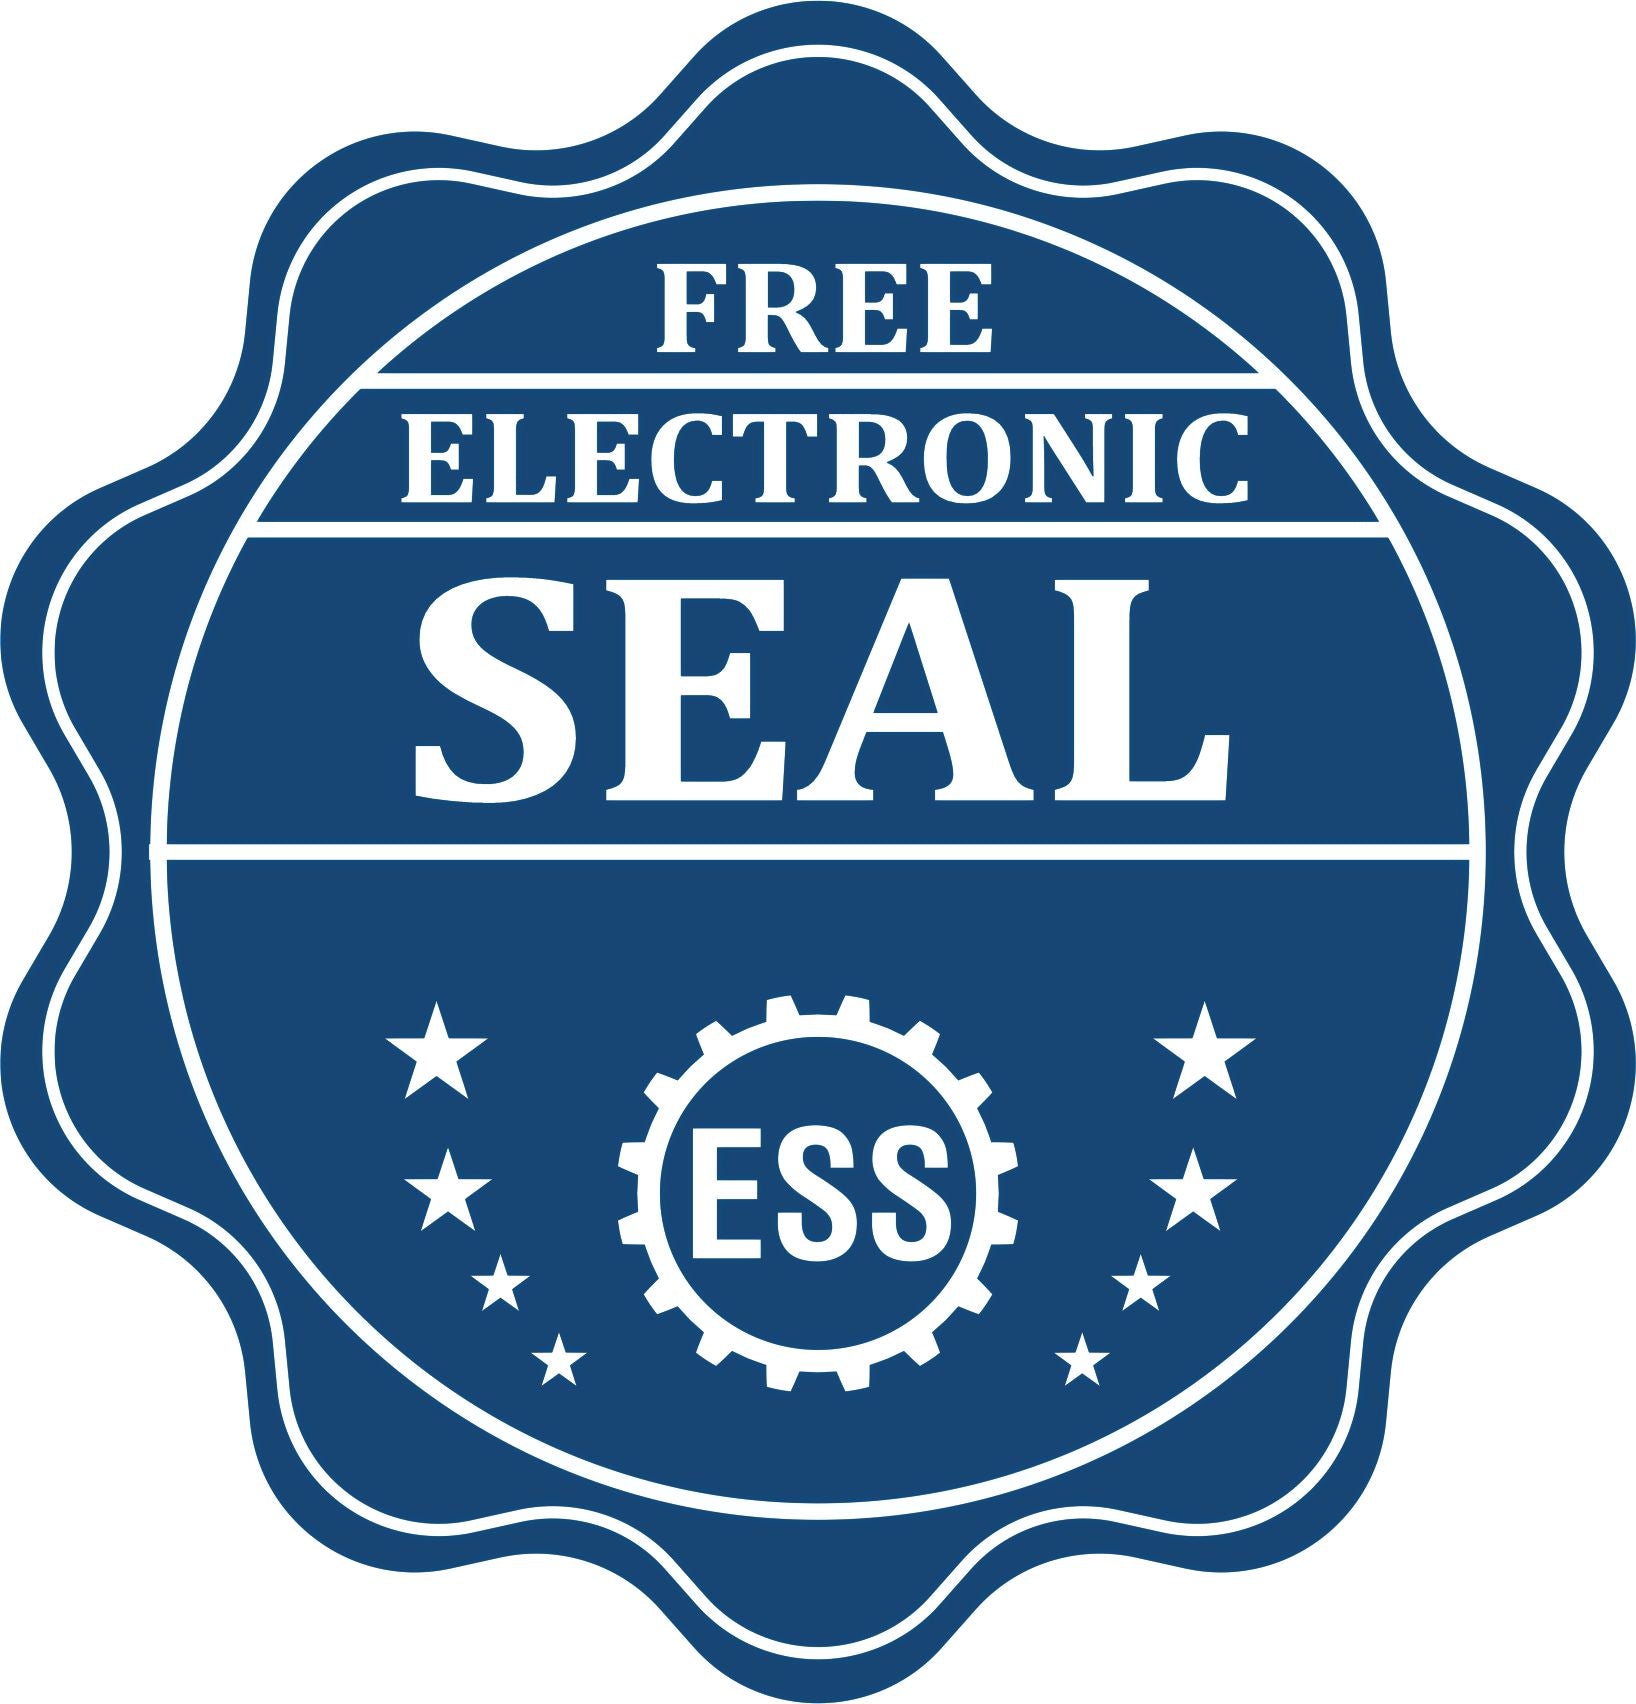 A badge showing a free electronic seal for the Gift Kentucky Geologist Seal with stars and the ESS gear on the emblem.